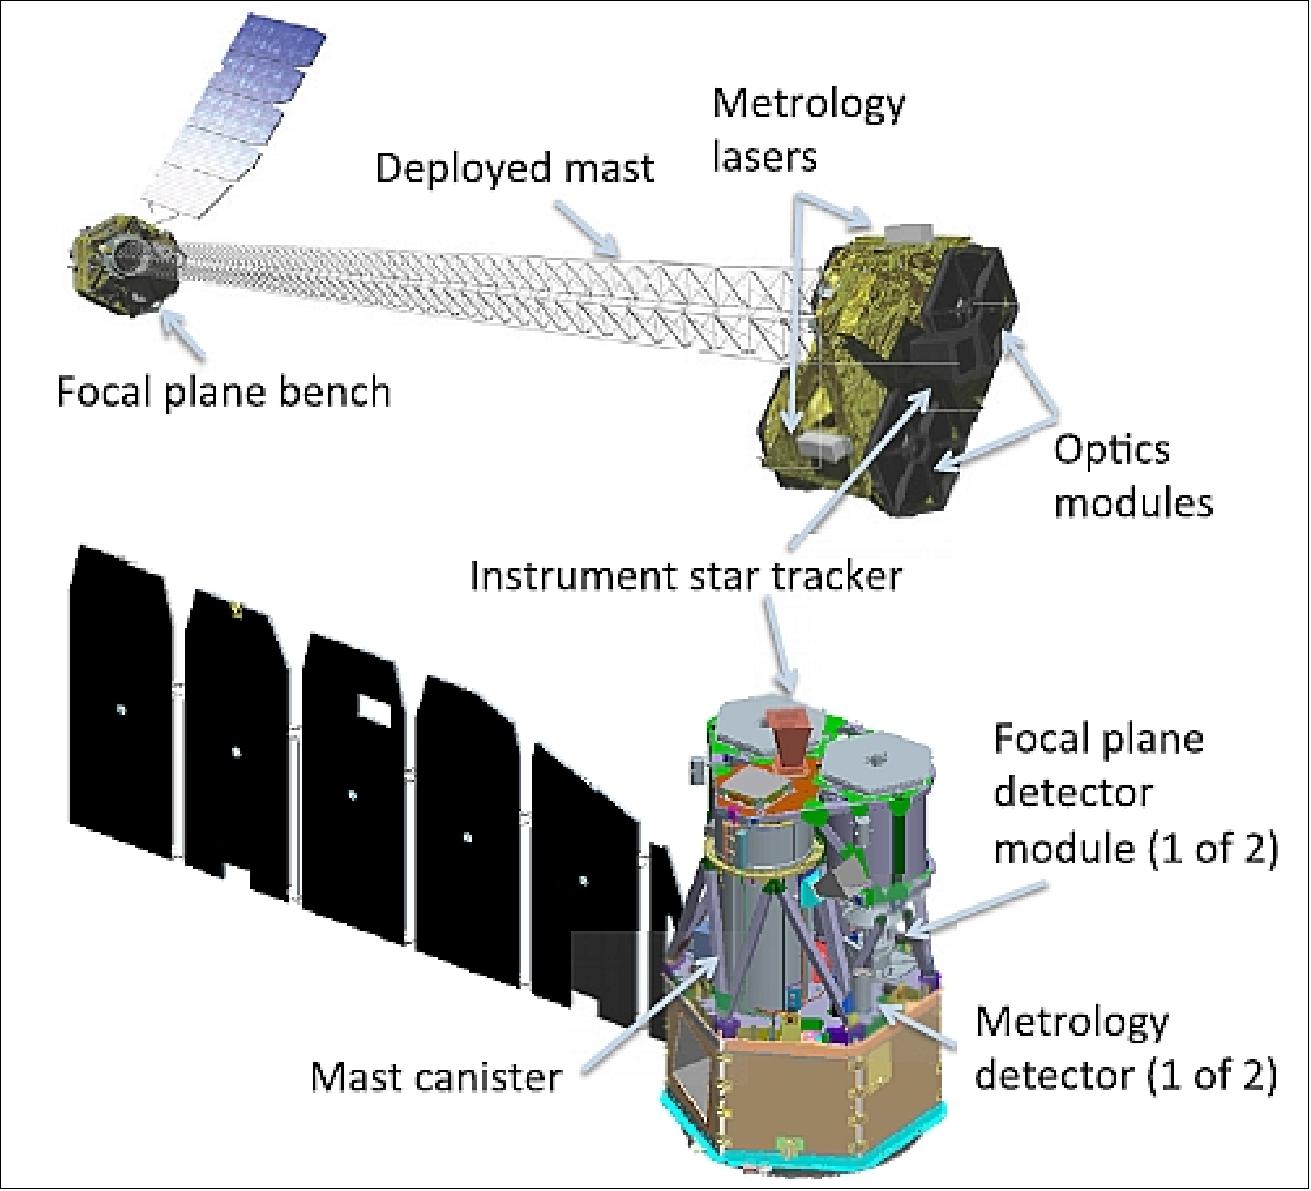 Figure 2: Diagram of the observatory in the stowed (bottom) and deployed (top) configurations (image credit: NuSTAR collaboration)